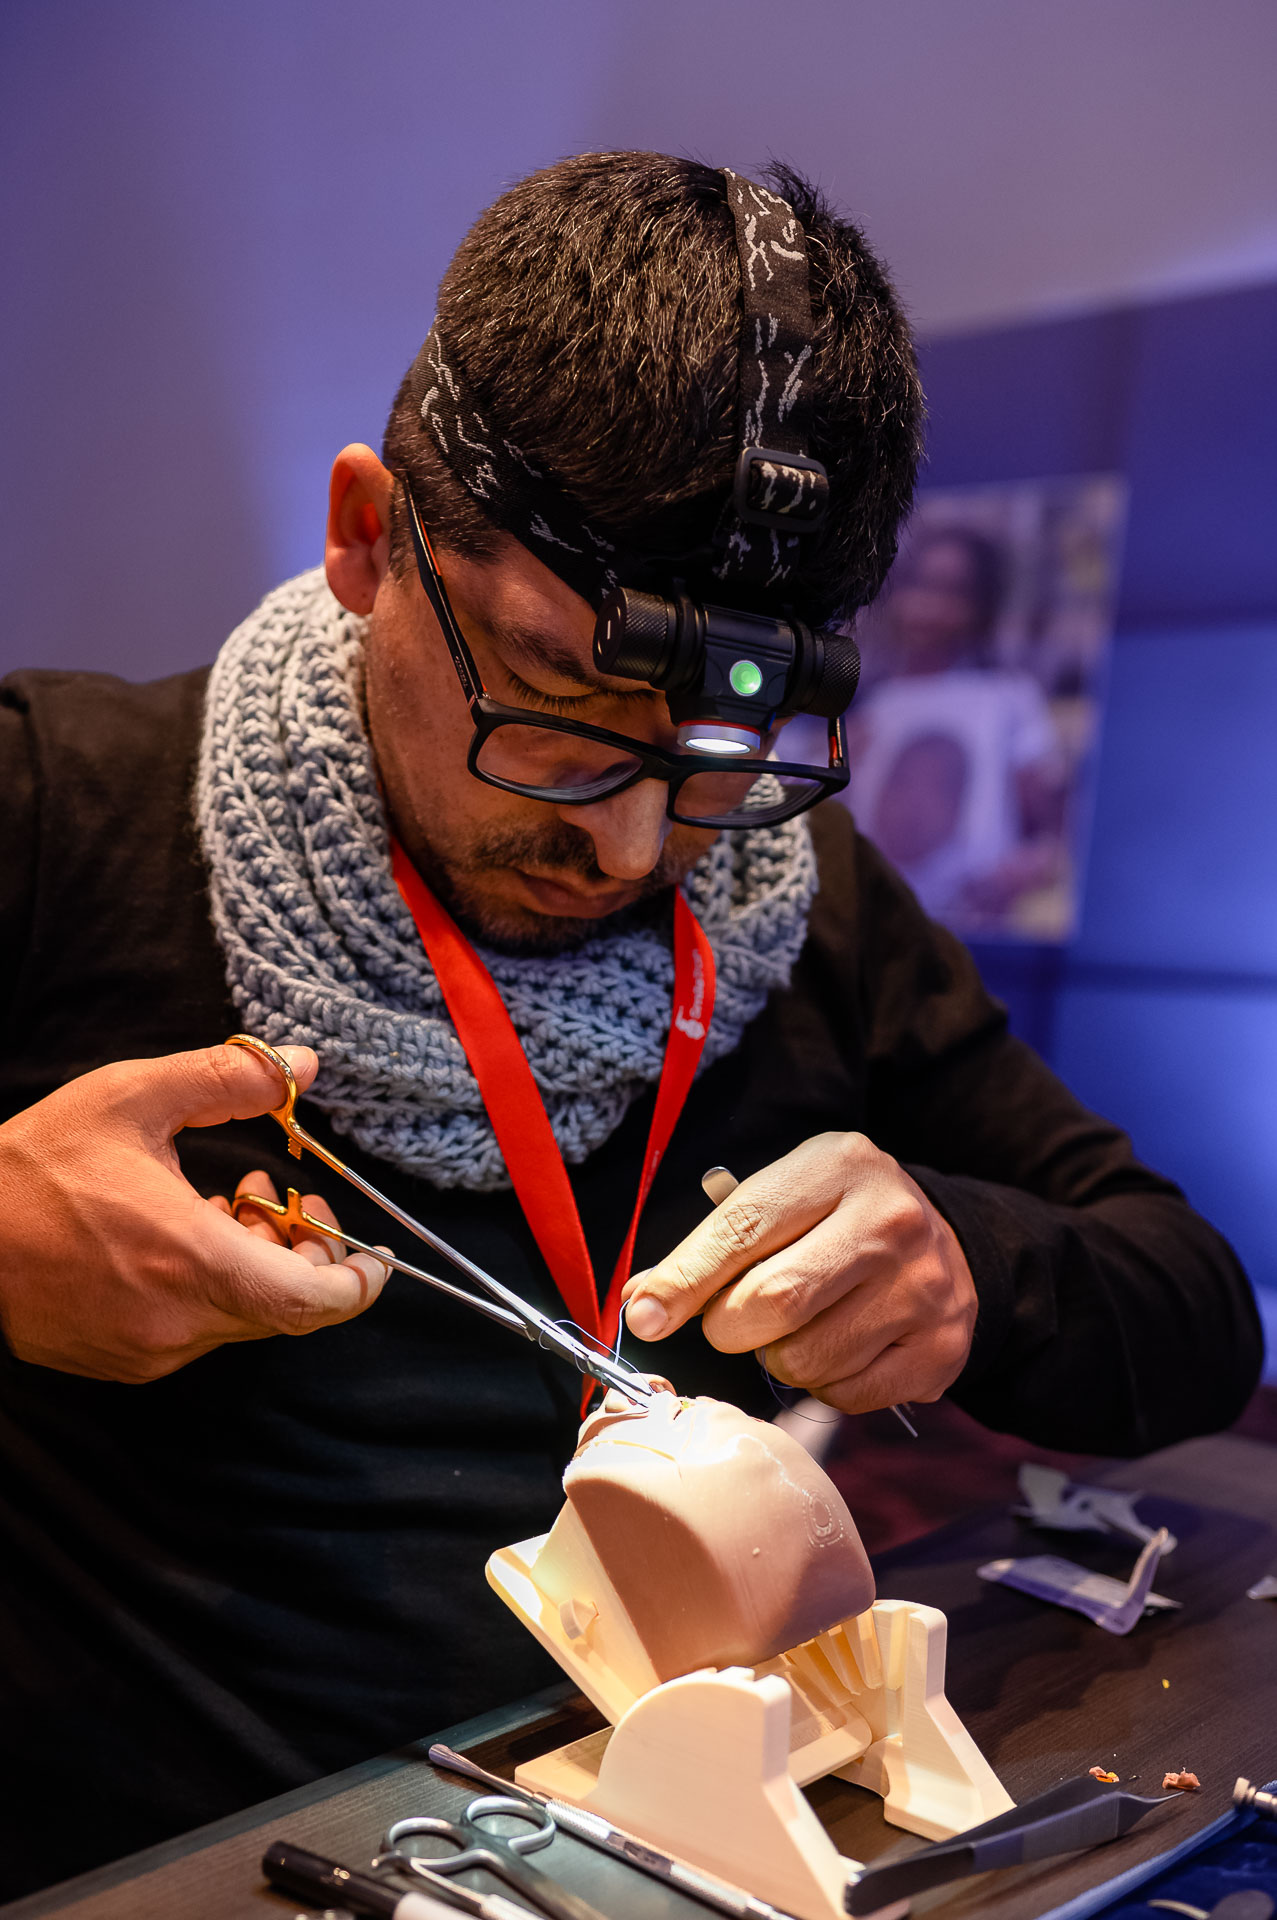 Huáscar Aillón wearing a headlamp sewing medical stitches onto a Simulare Medical simulator